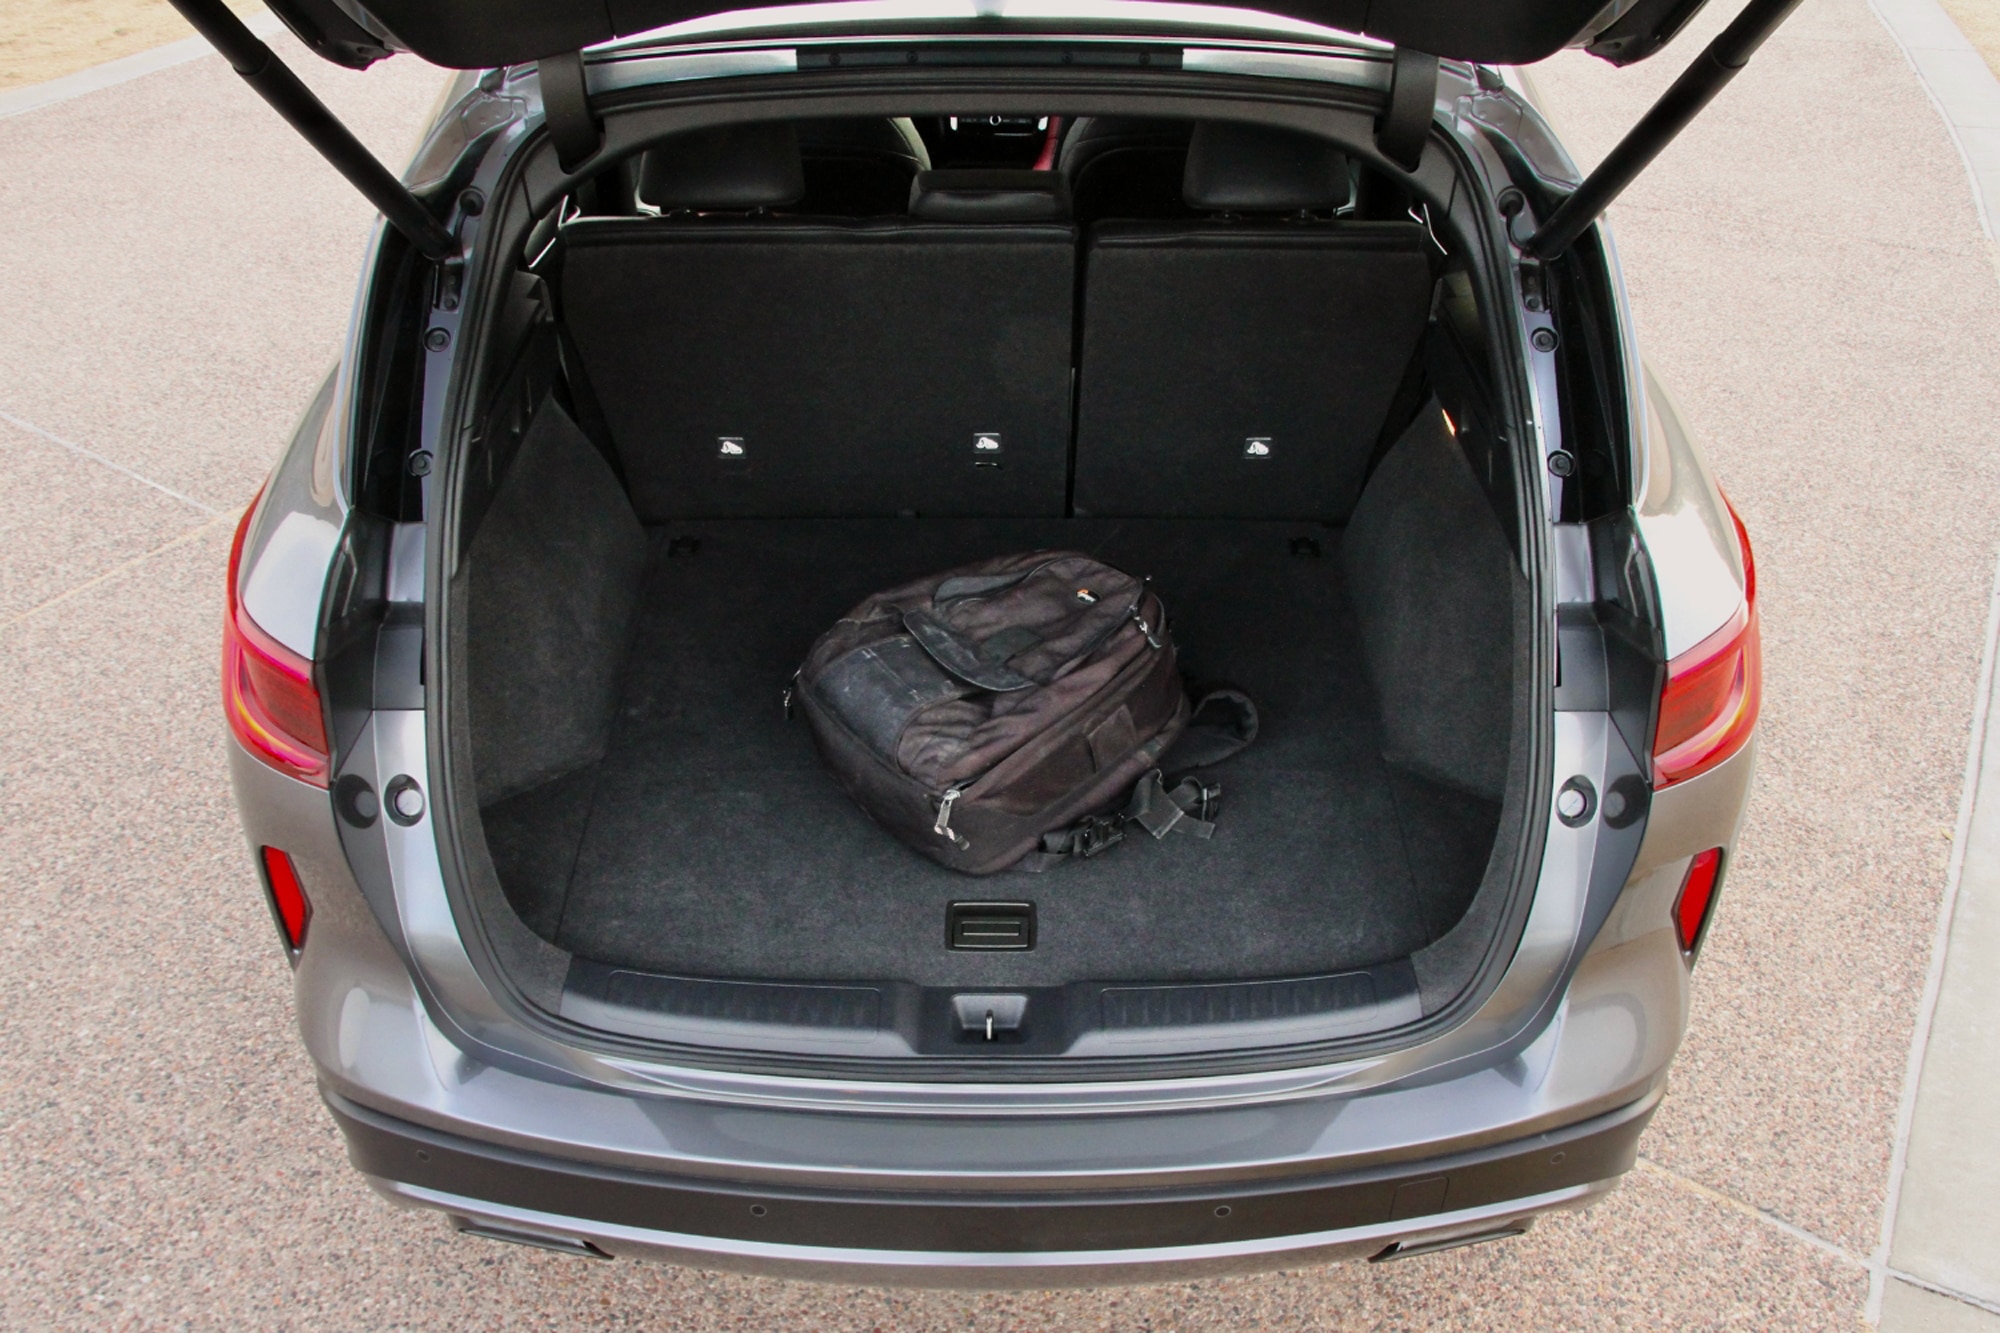 Gray 2023 Infiniti QX50 Sport open cargo space with backpack inside